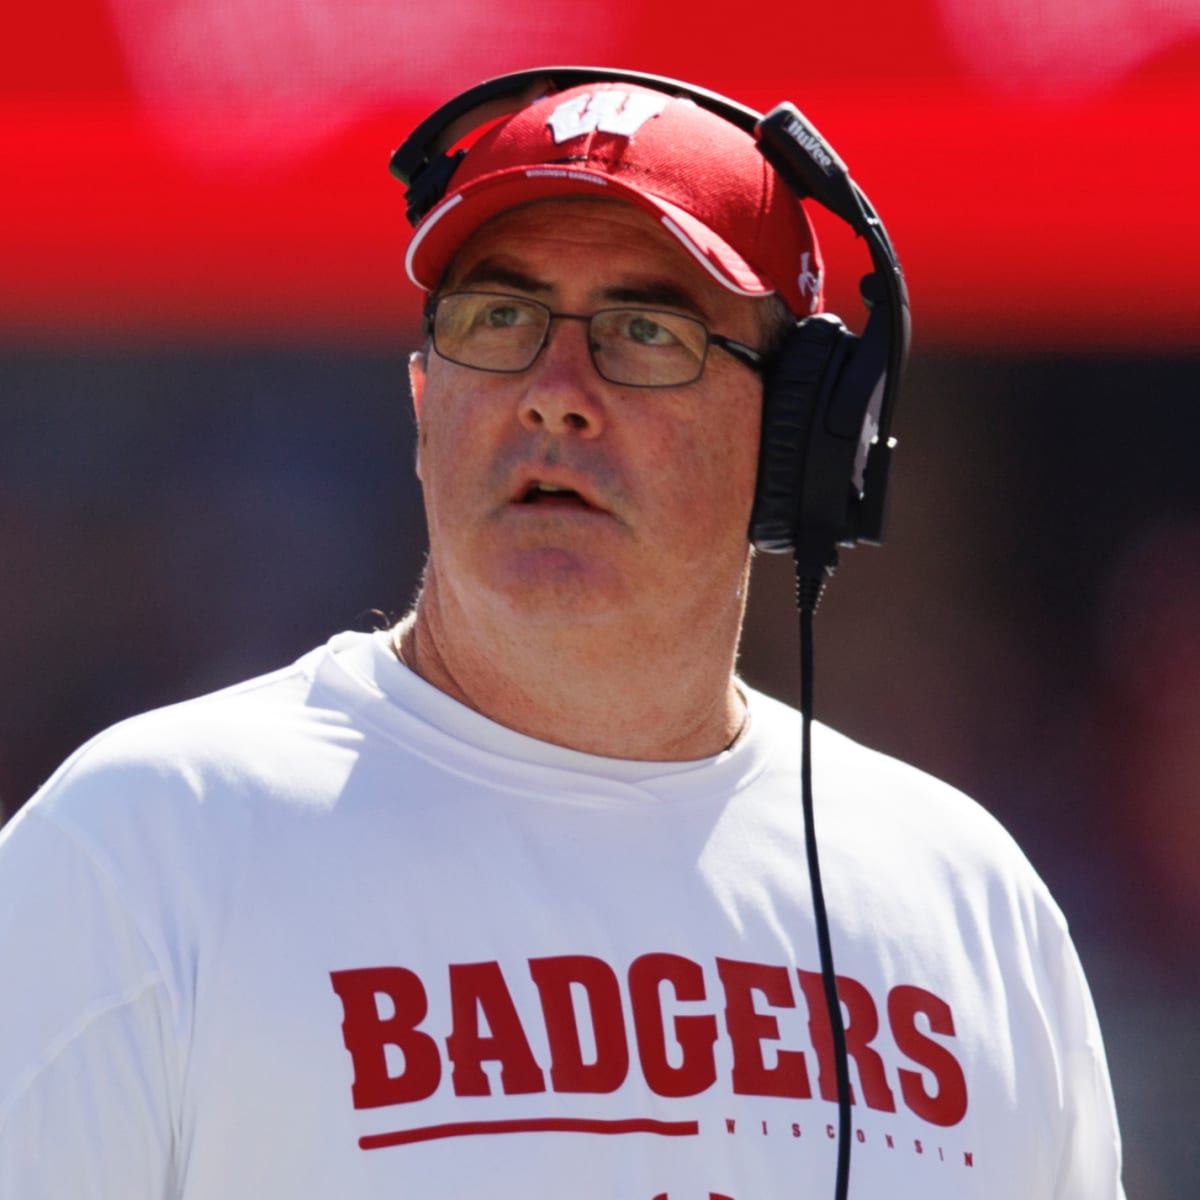 Paul Chryst falls victim to a new, ruthless way of life - Sports Illustrated